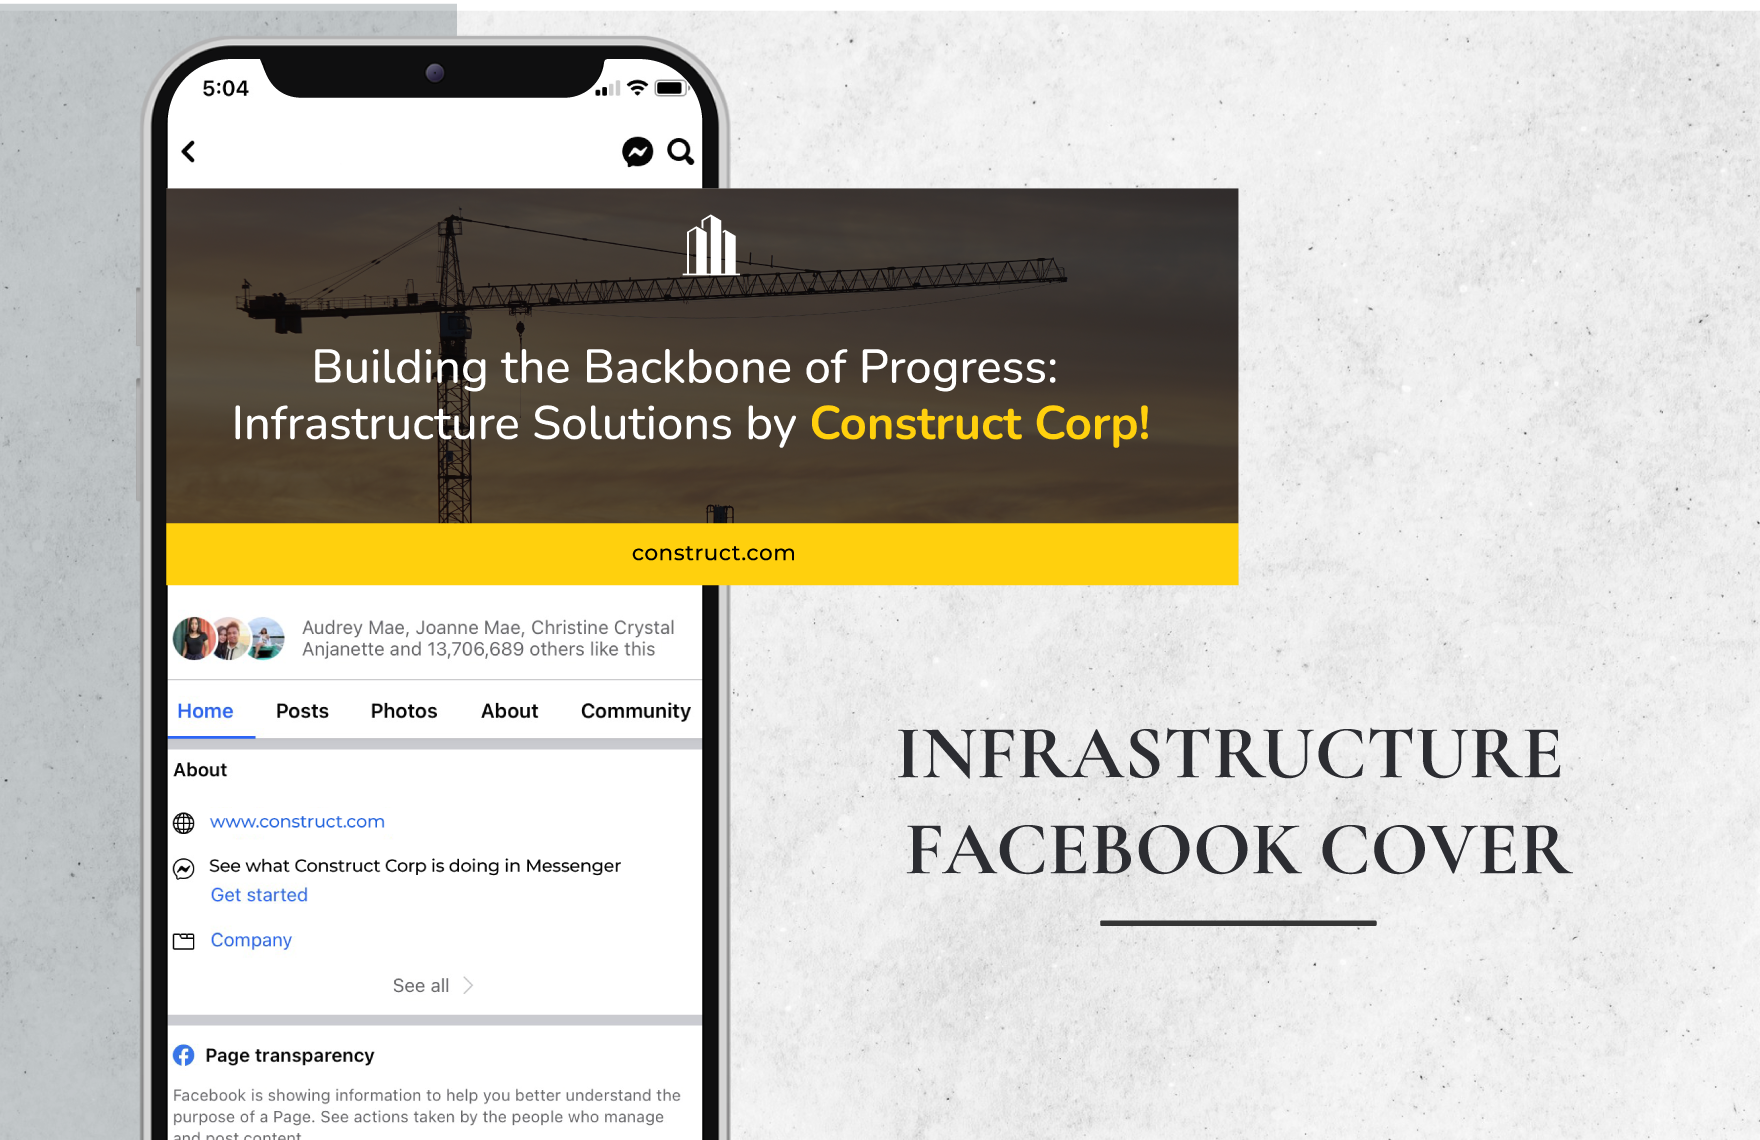 Infrastructure Facebook Cover